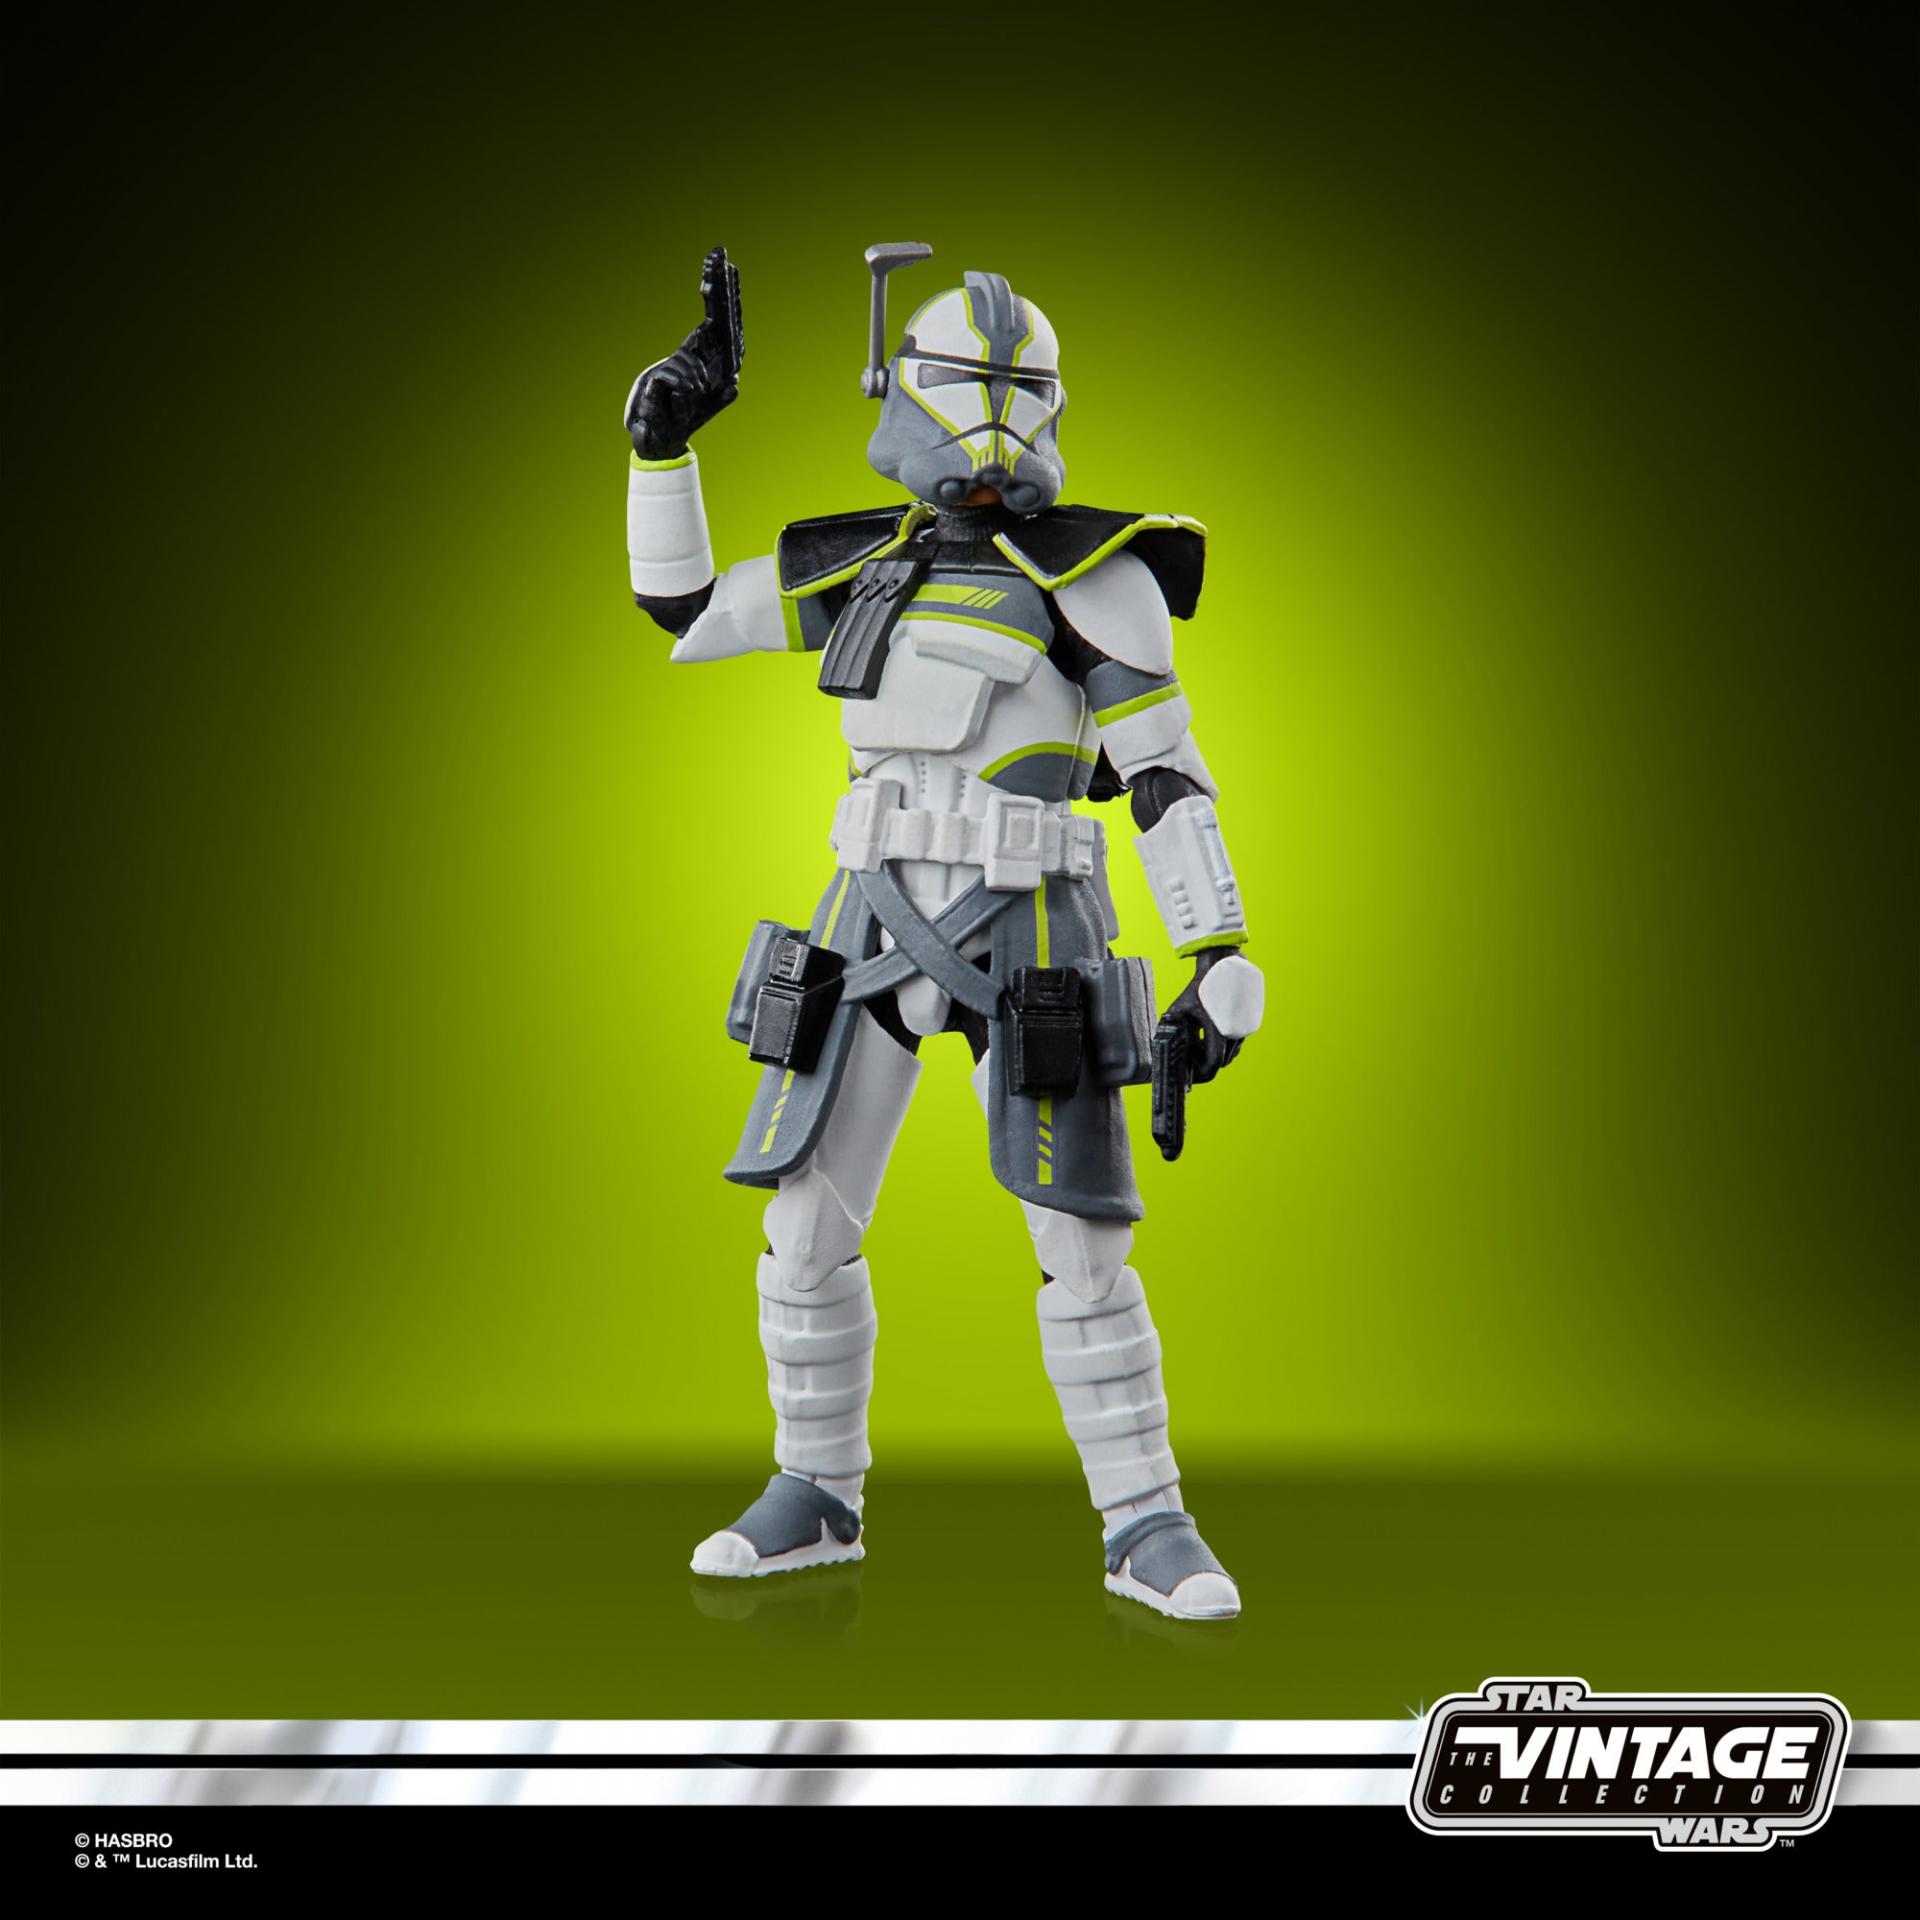 Star wars the vintage collection gaming greats arc trooper lambent seeker jawascave 3